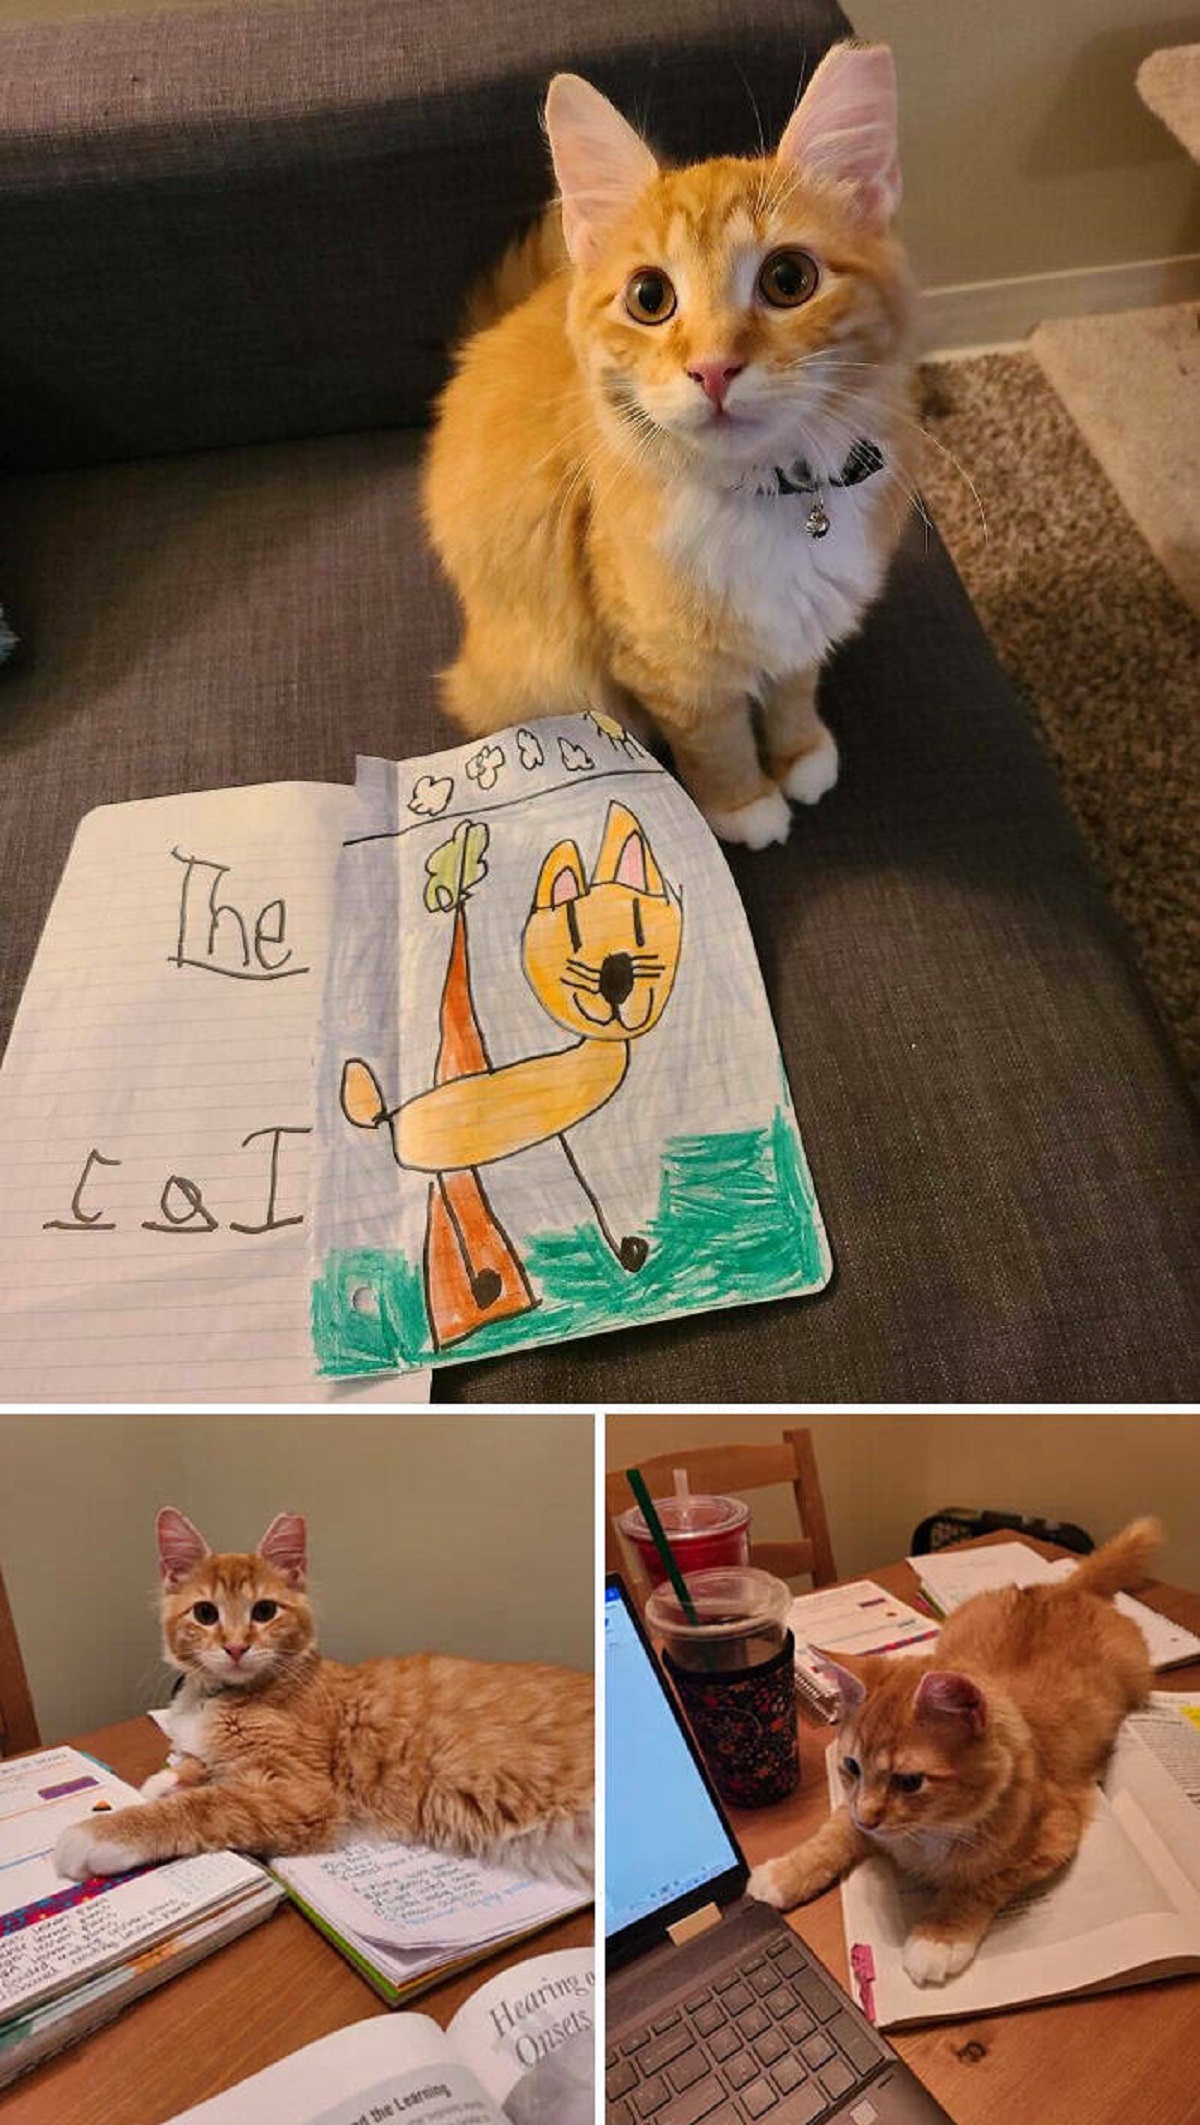 "I Teach Kindergarten And Always Talk About My Cat Teddy, Today One Of My Students Drew Me A Picture Of Him So I Took Some Pictures To Show Her And Say Thank You"